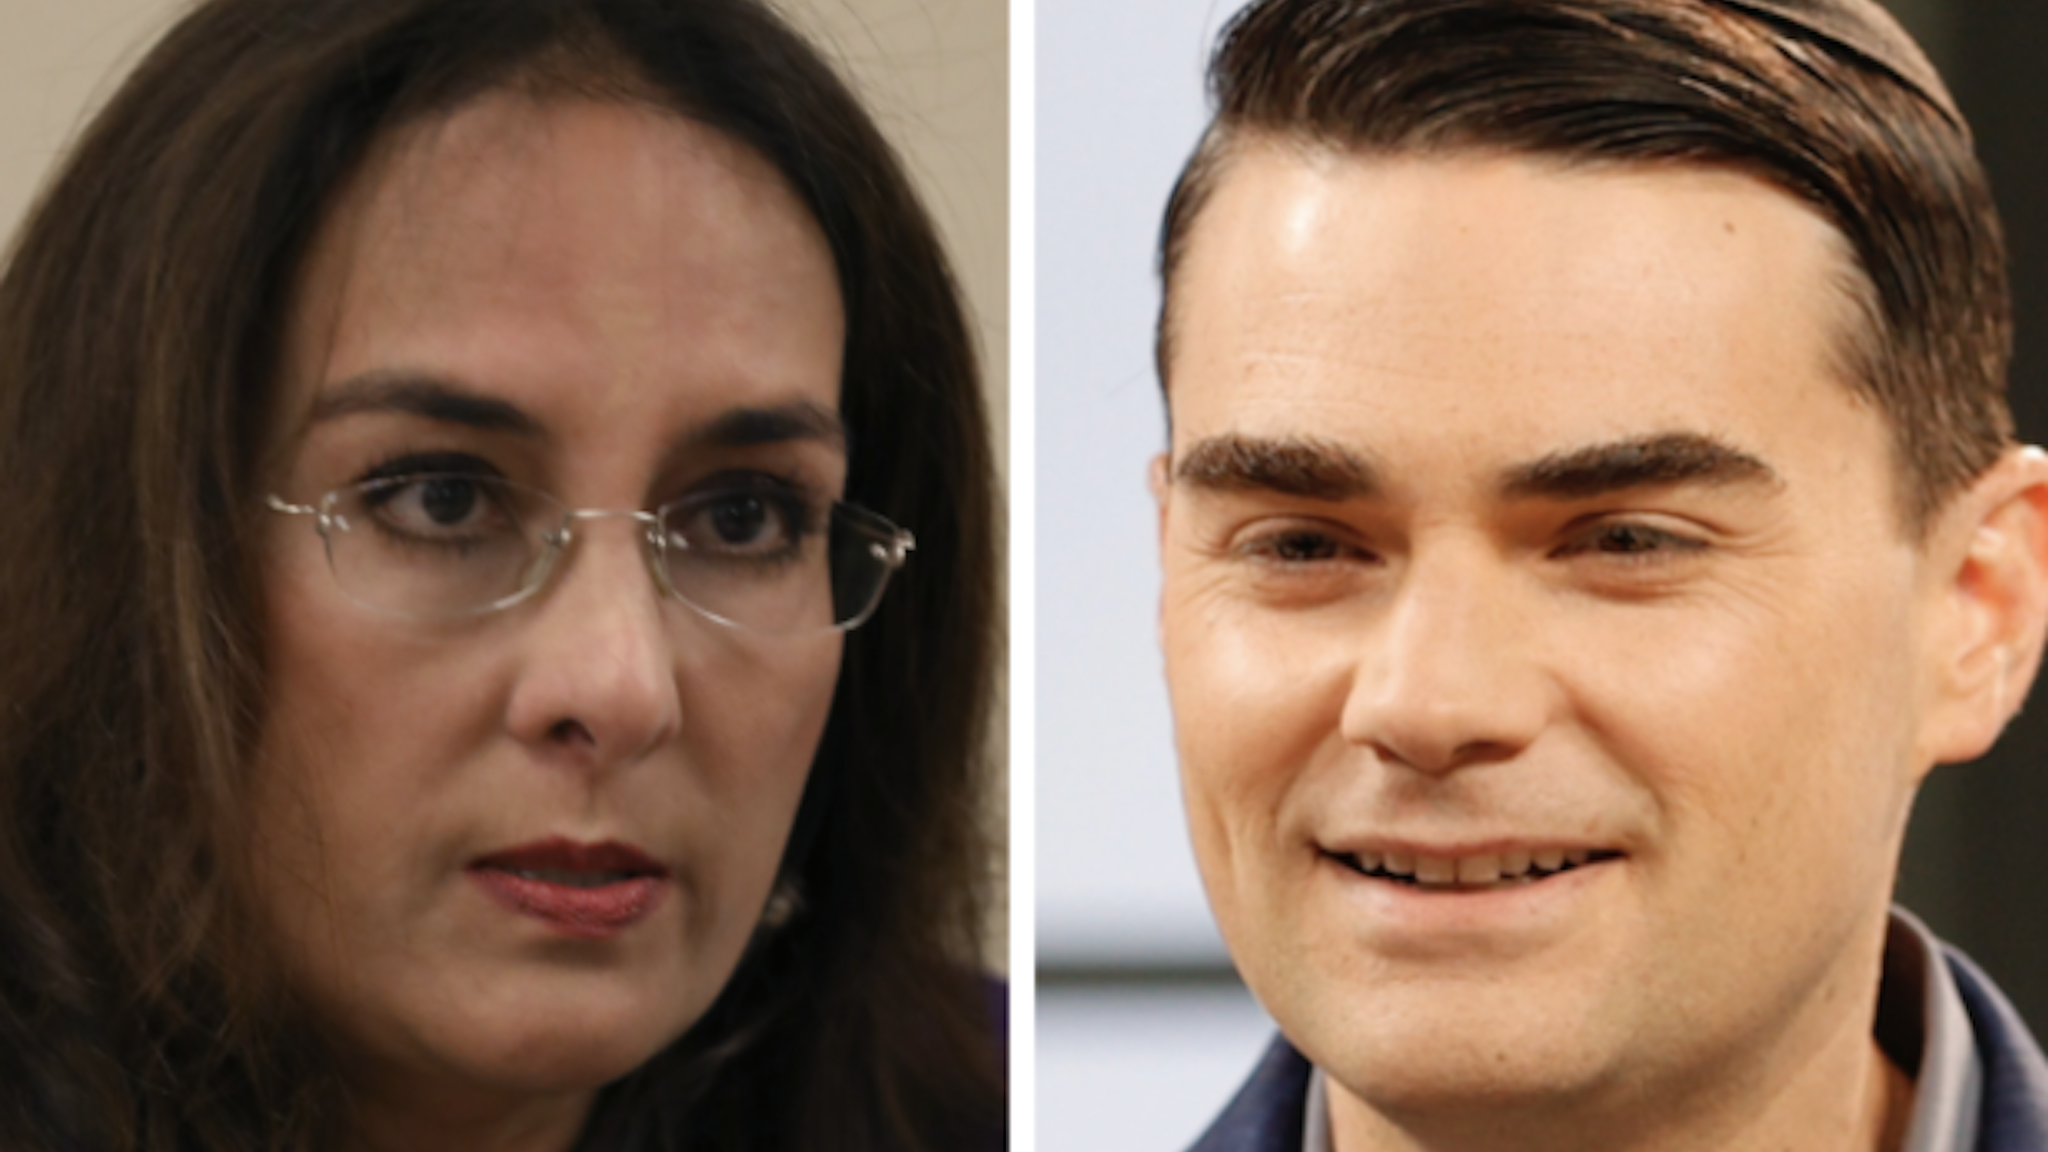 Harmeet Dhillon told The Daily Wire's BEN SHAPIRO the RNC needs new leadership in order to compete with Democrats.